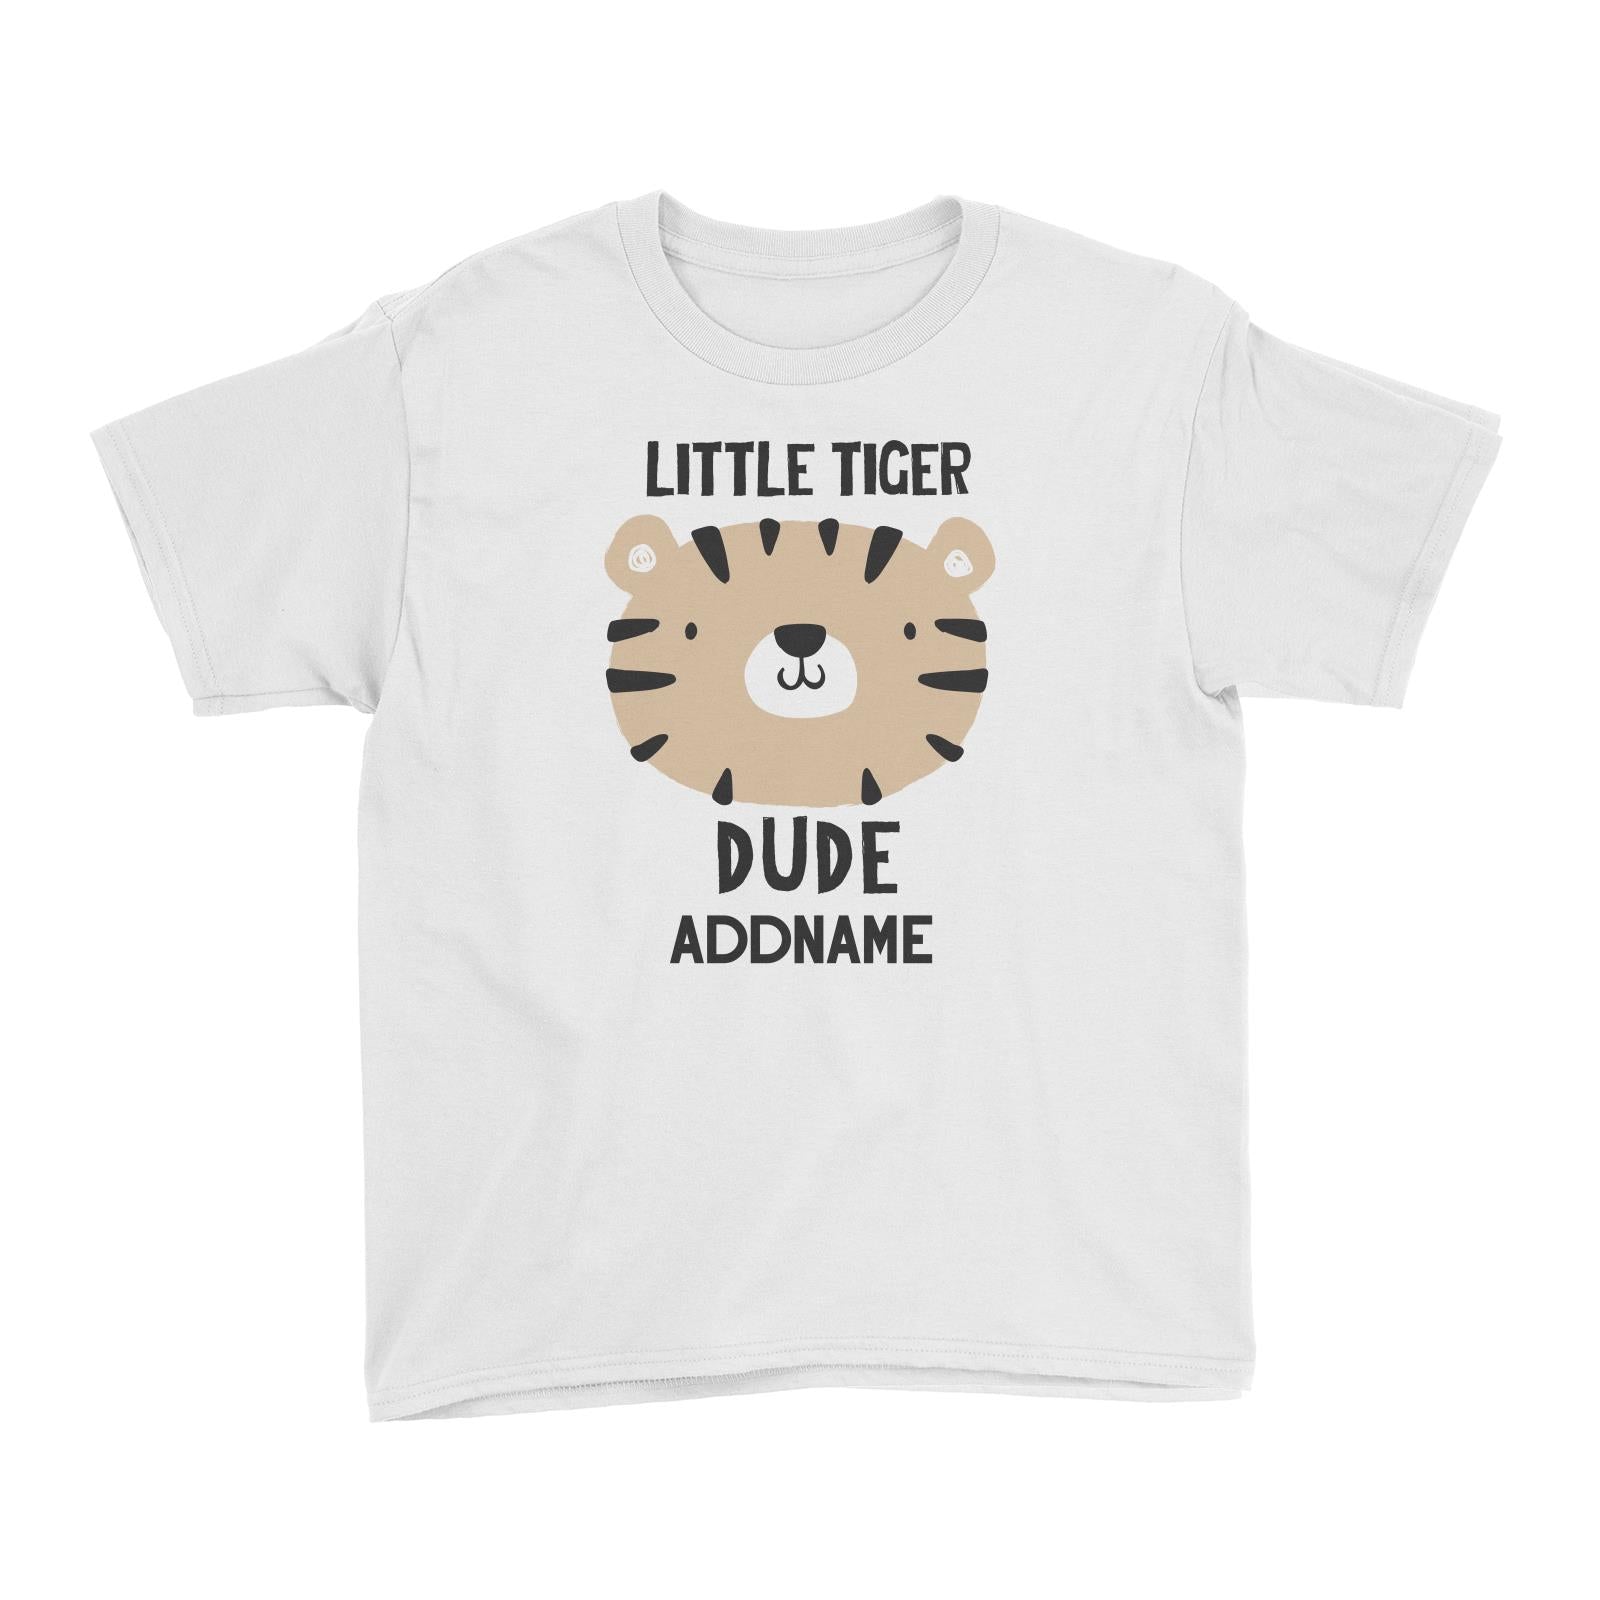 Little Tiger Dude Addname White Kid's T-Shirt